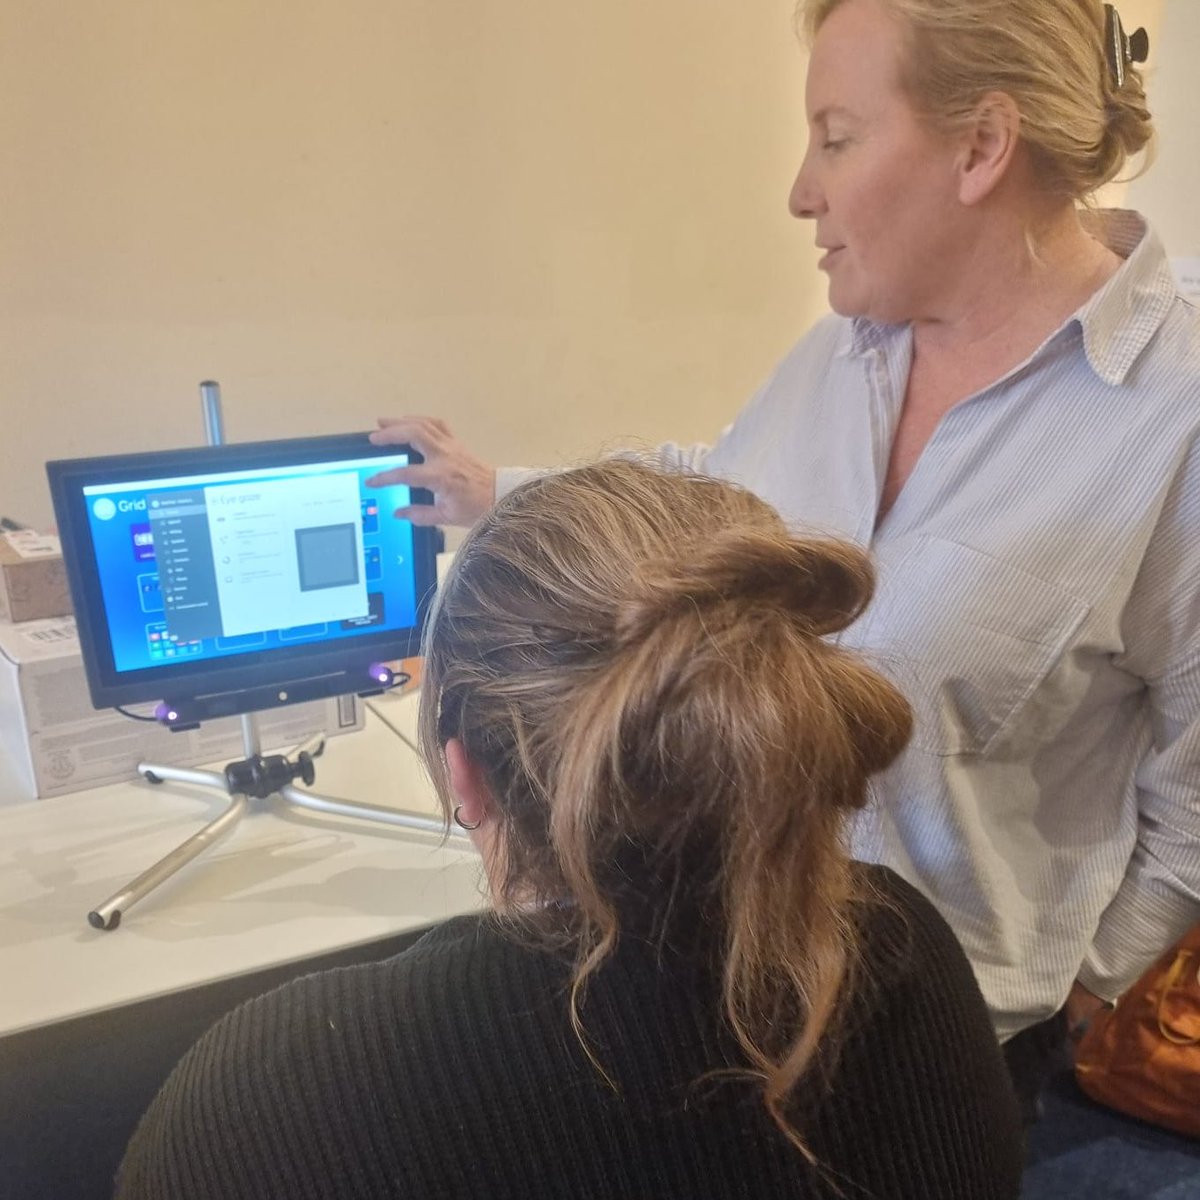 At a recent tech team meeting, we had the pleasure of meeting Jacqui from Smartbox Assistive Technology. Our team members experimented with the newest eye gaze camera, with Tiffany seen trialing it. What an impressive camera! #eyegaze #accessibility